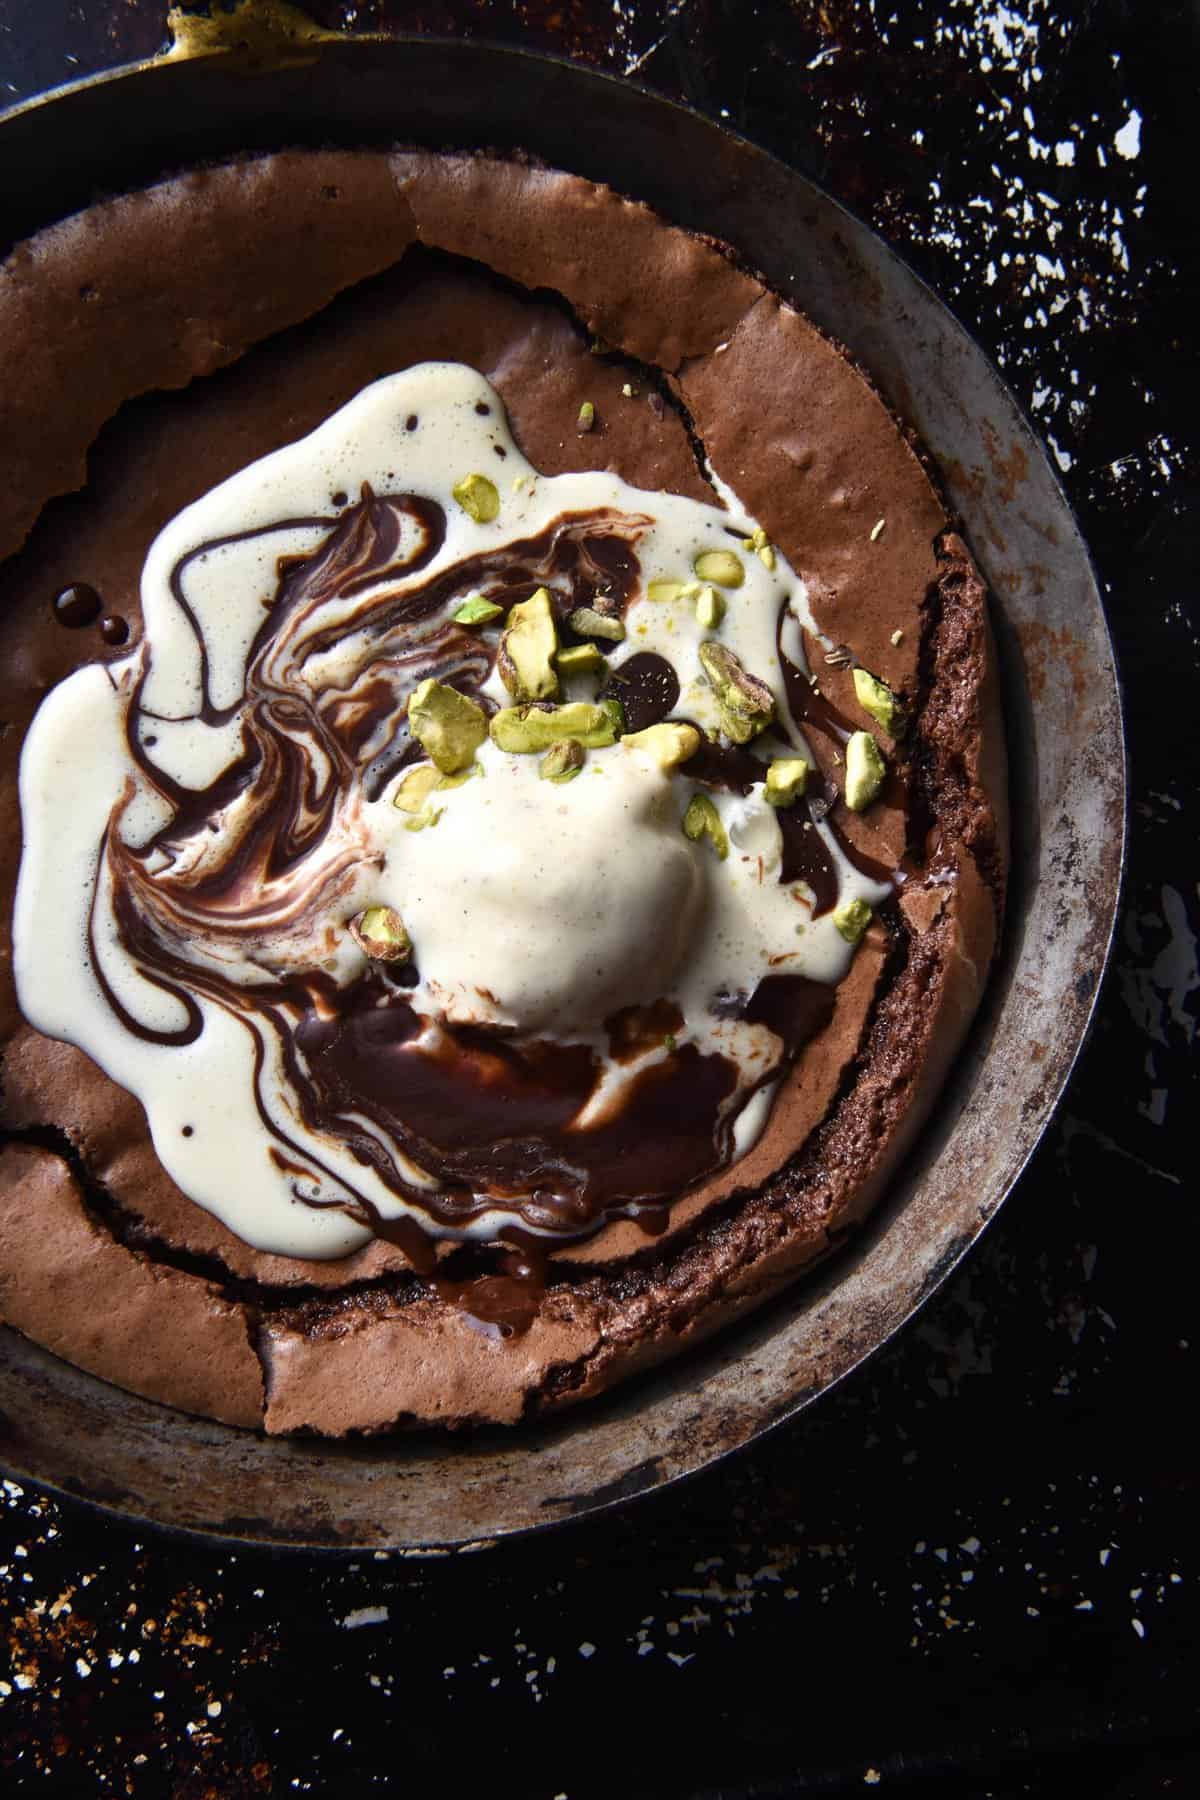 A close up aerial view of a gluten free small batch skillet brownie. The brownie is topped with melting ice cream swirled with melted chocolate and topped with some chopped pistachios. It sits atop a black mottled backdrop